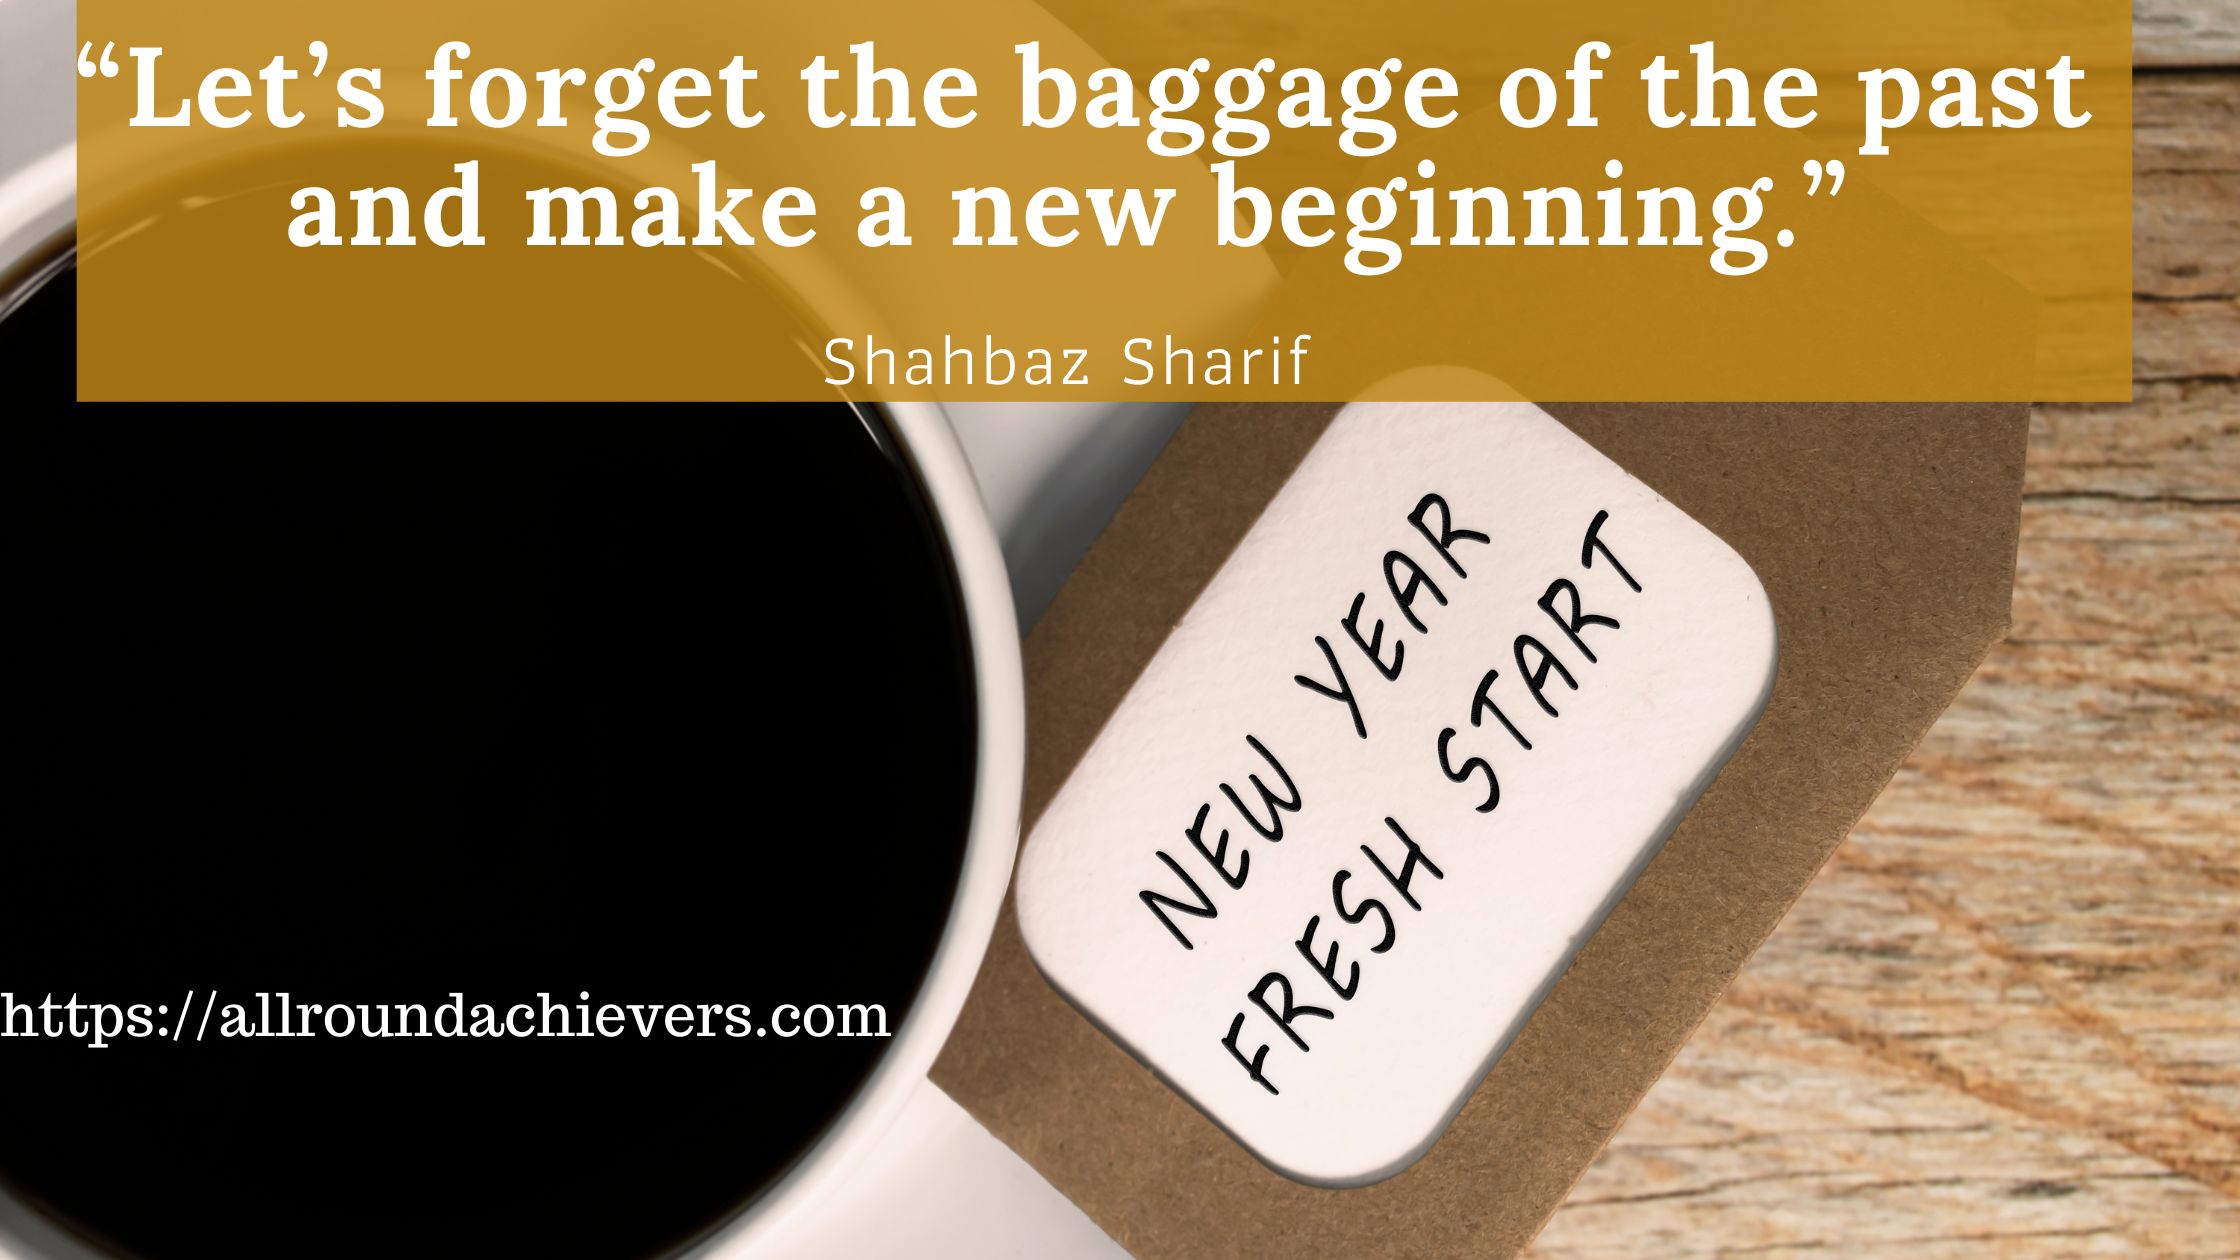 “Let’s forget the baggage of the past and make a new beginning.” ~ Shahbaz Sharif